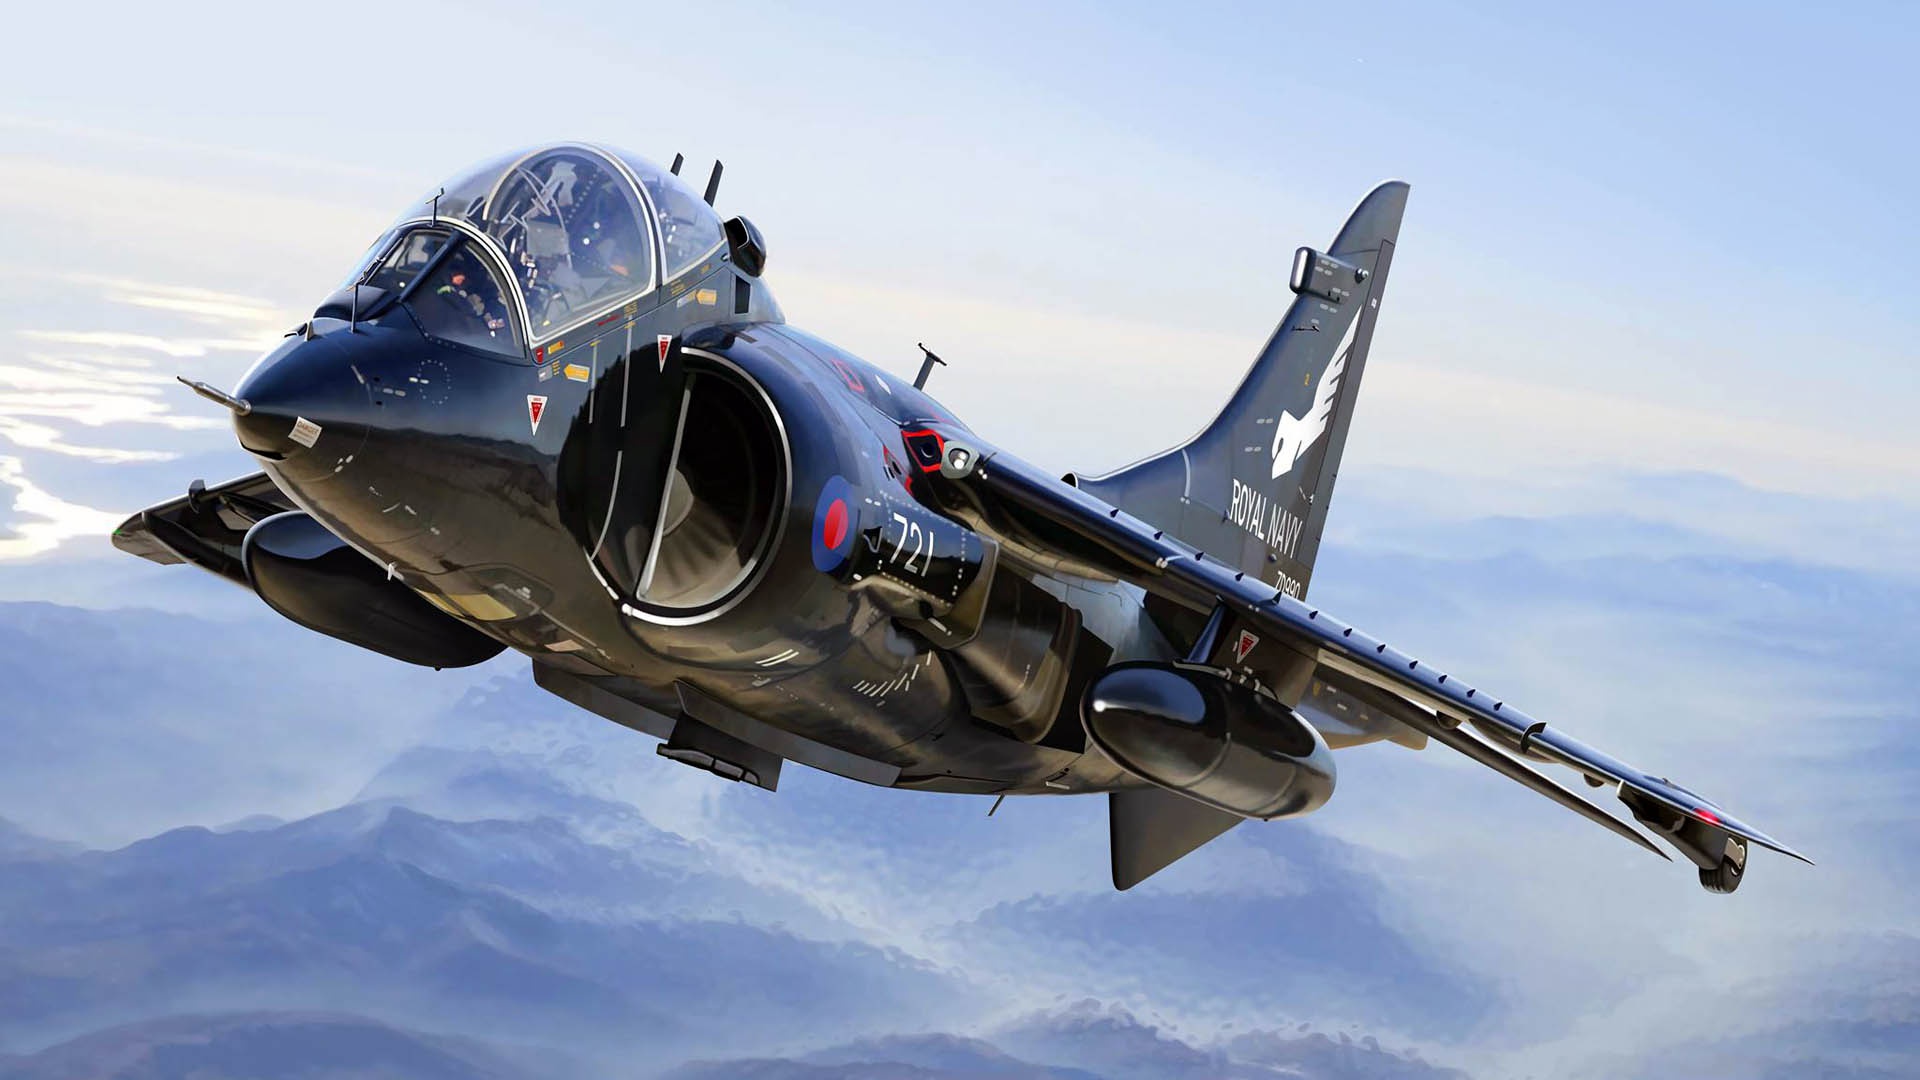 General 1920x1080 aircraft military military aircraft vehicle numbers AV-8B Harrier II McDonnell Douglas sky clouds military vehicle flying American aircraft pilot British aircraft